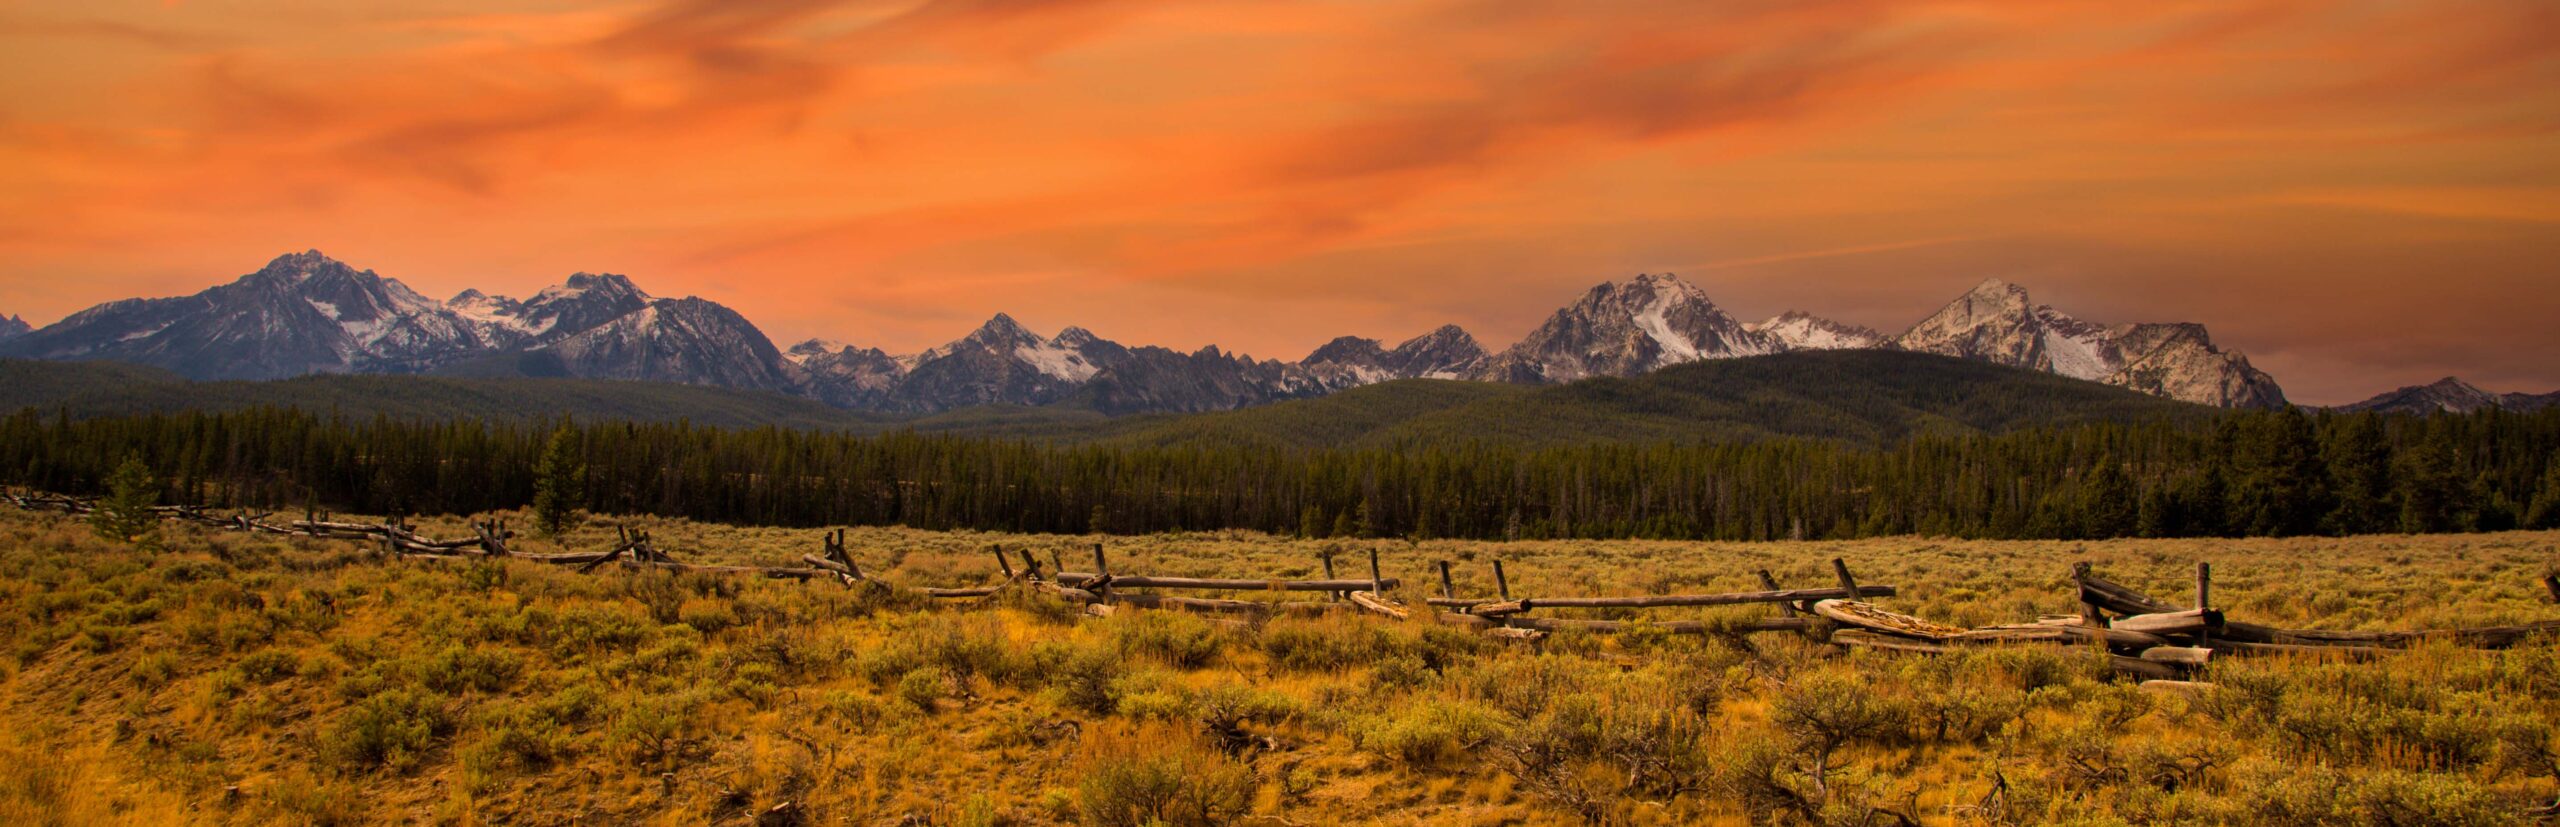 Panorama view of the Sawtooth mountains at sunset with a split rail fence